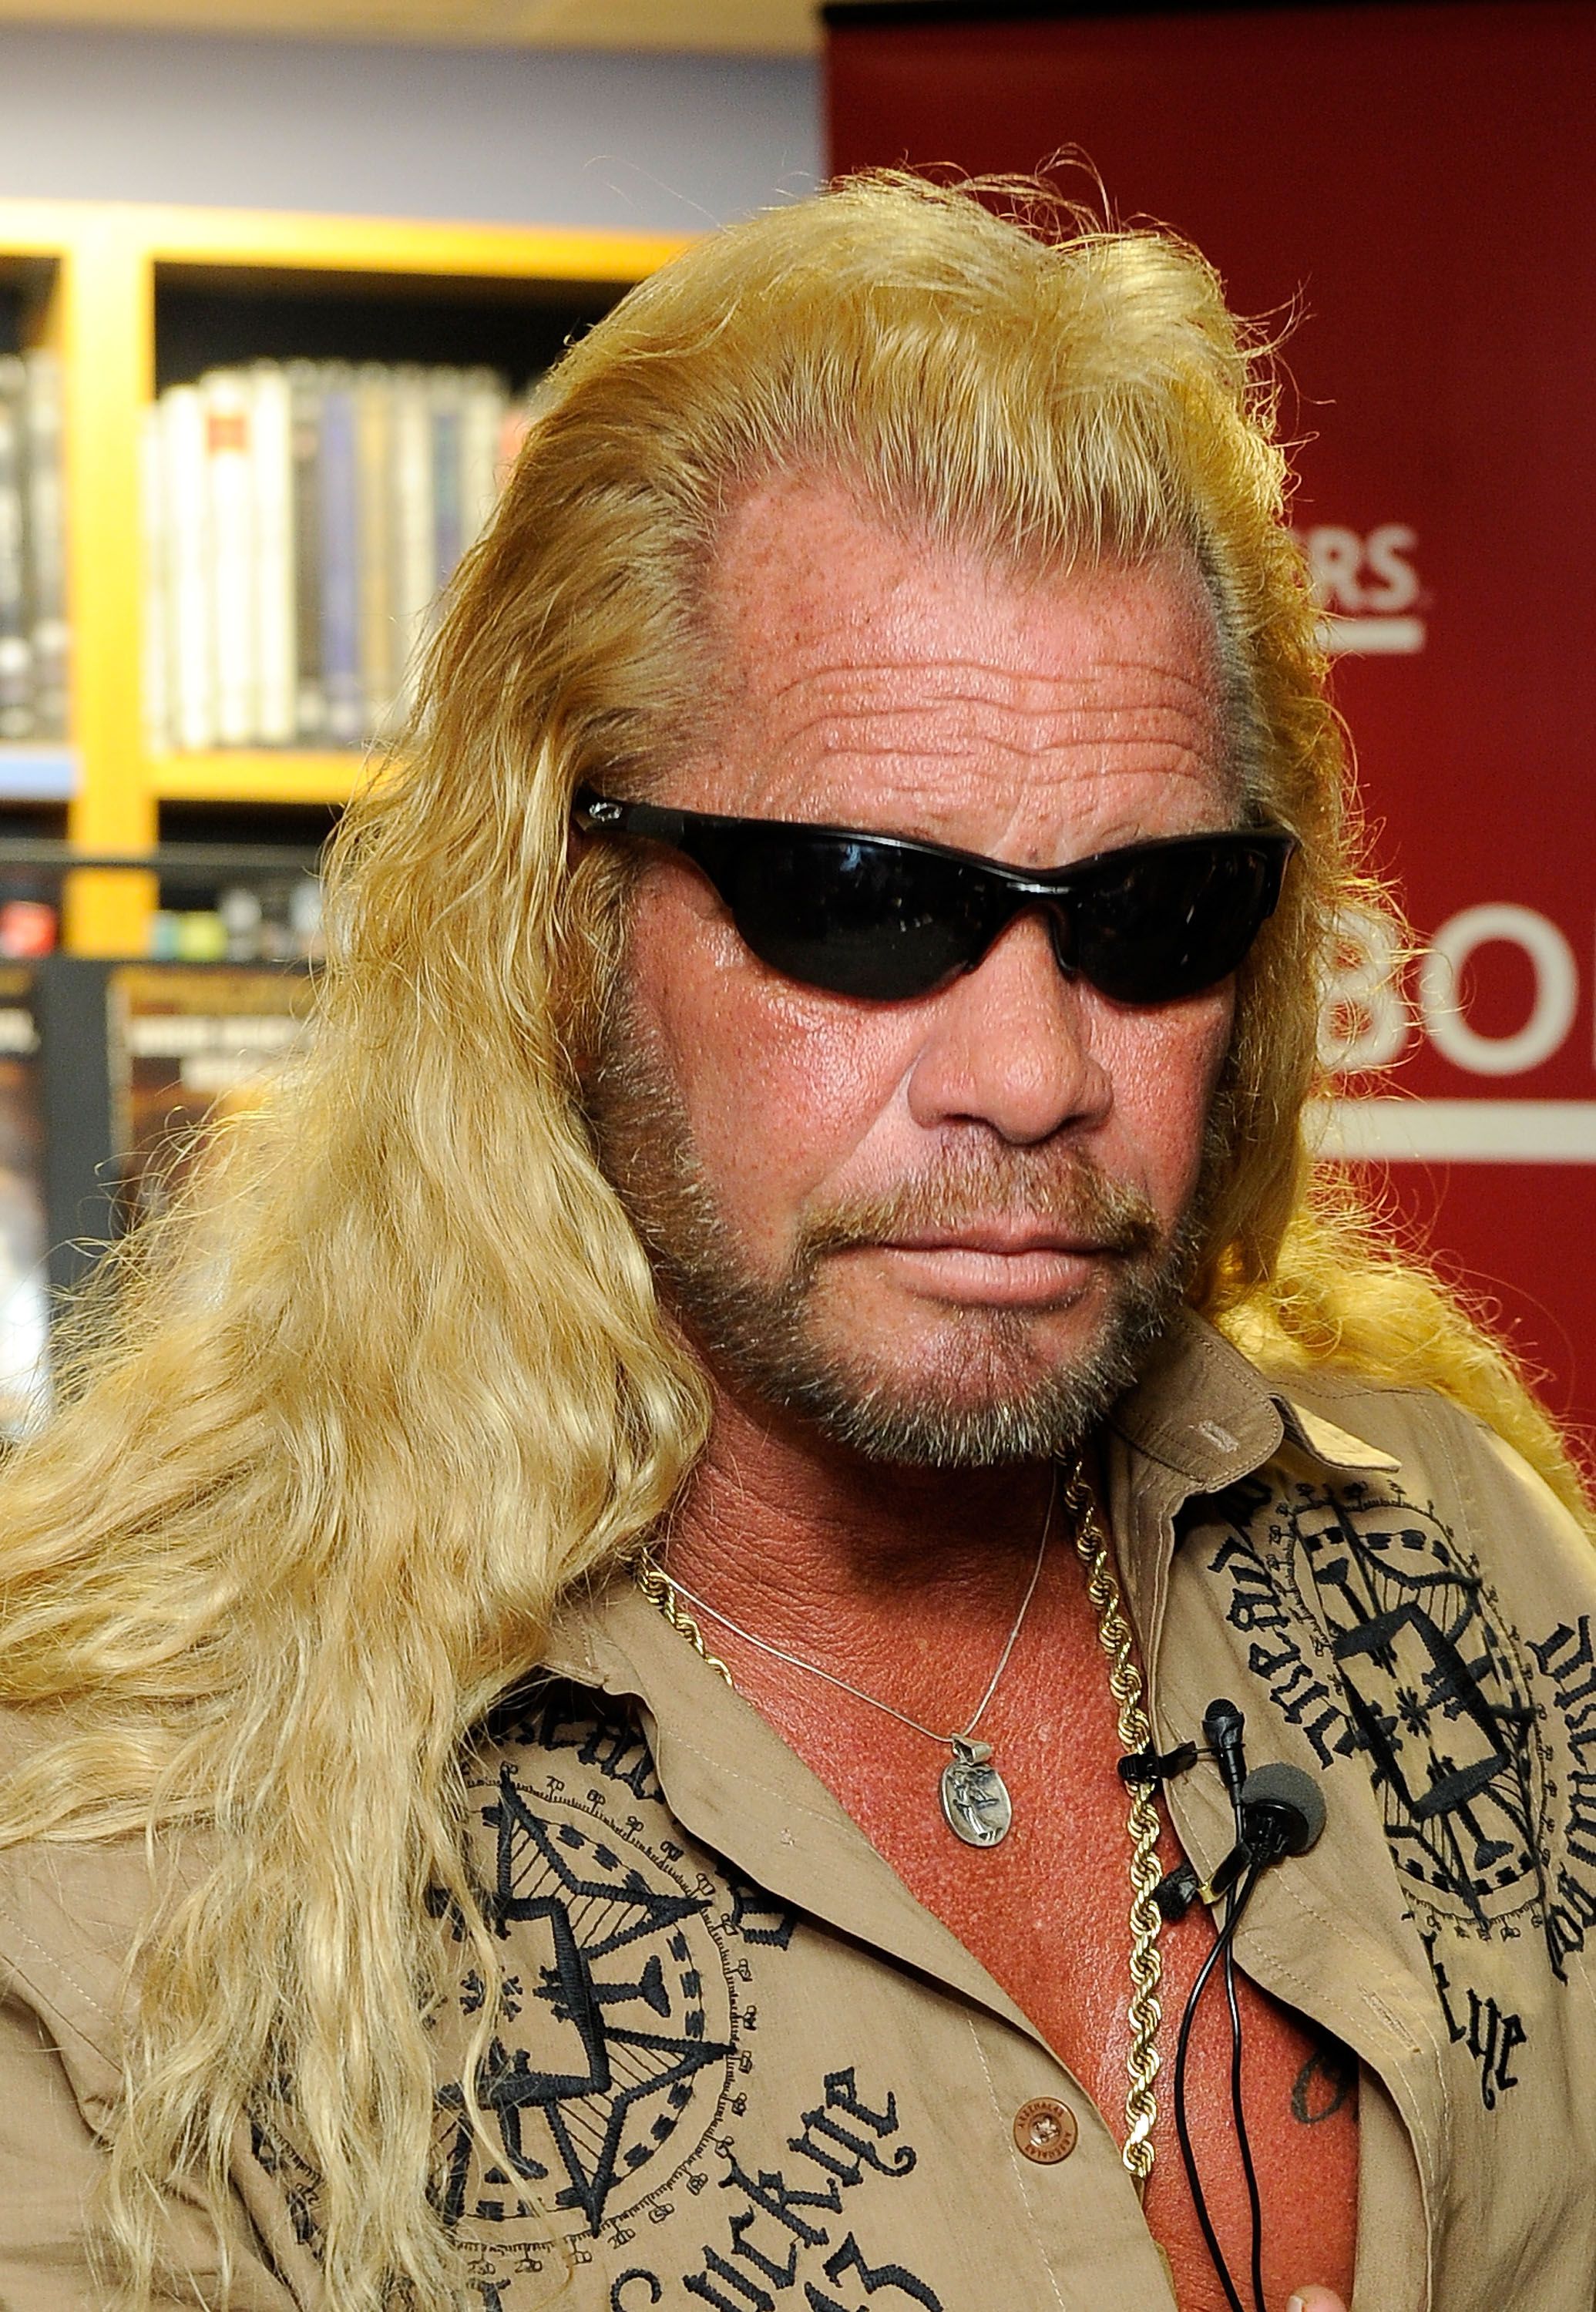 Duane Chapman, known in the media as "Dog the Bounty Hunter" promotes his book "When Mercy Is Shown, Mercy Is Given" at Borders Wall Street on March 19, 2010 in New York City | Photo: Getty Images  